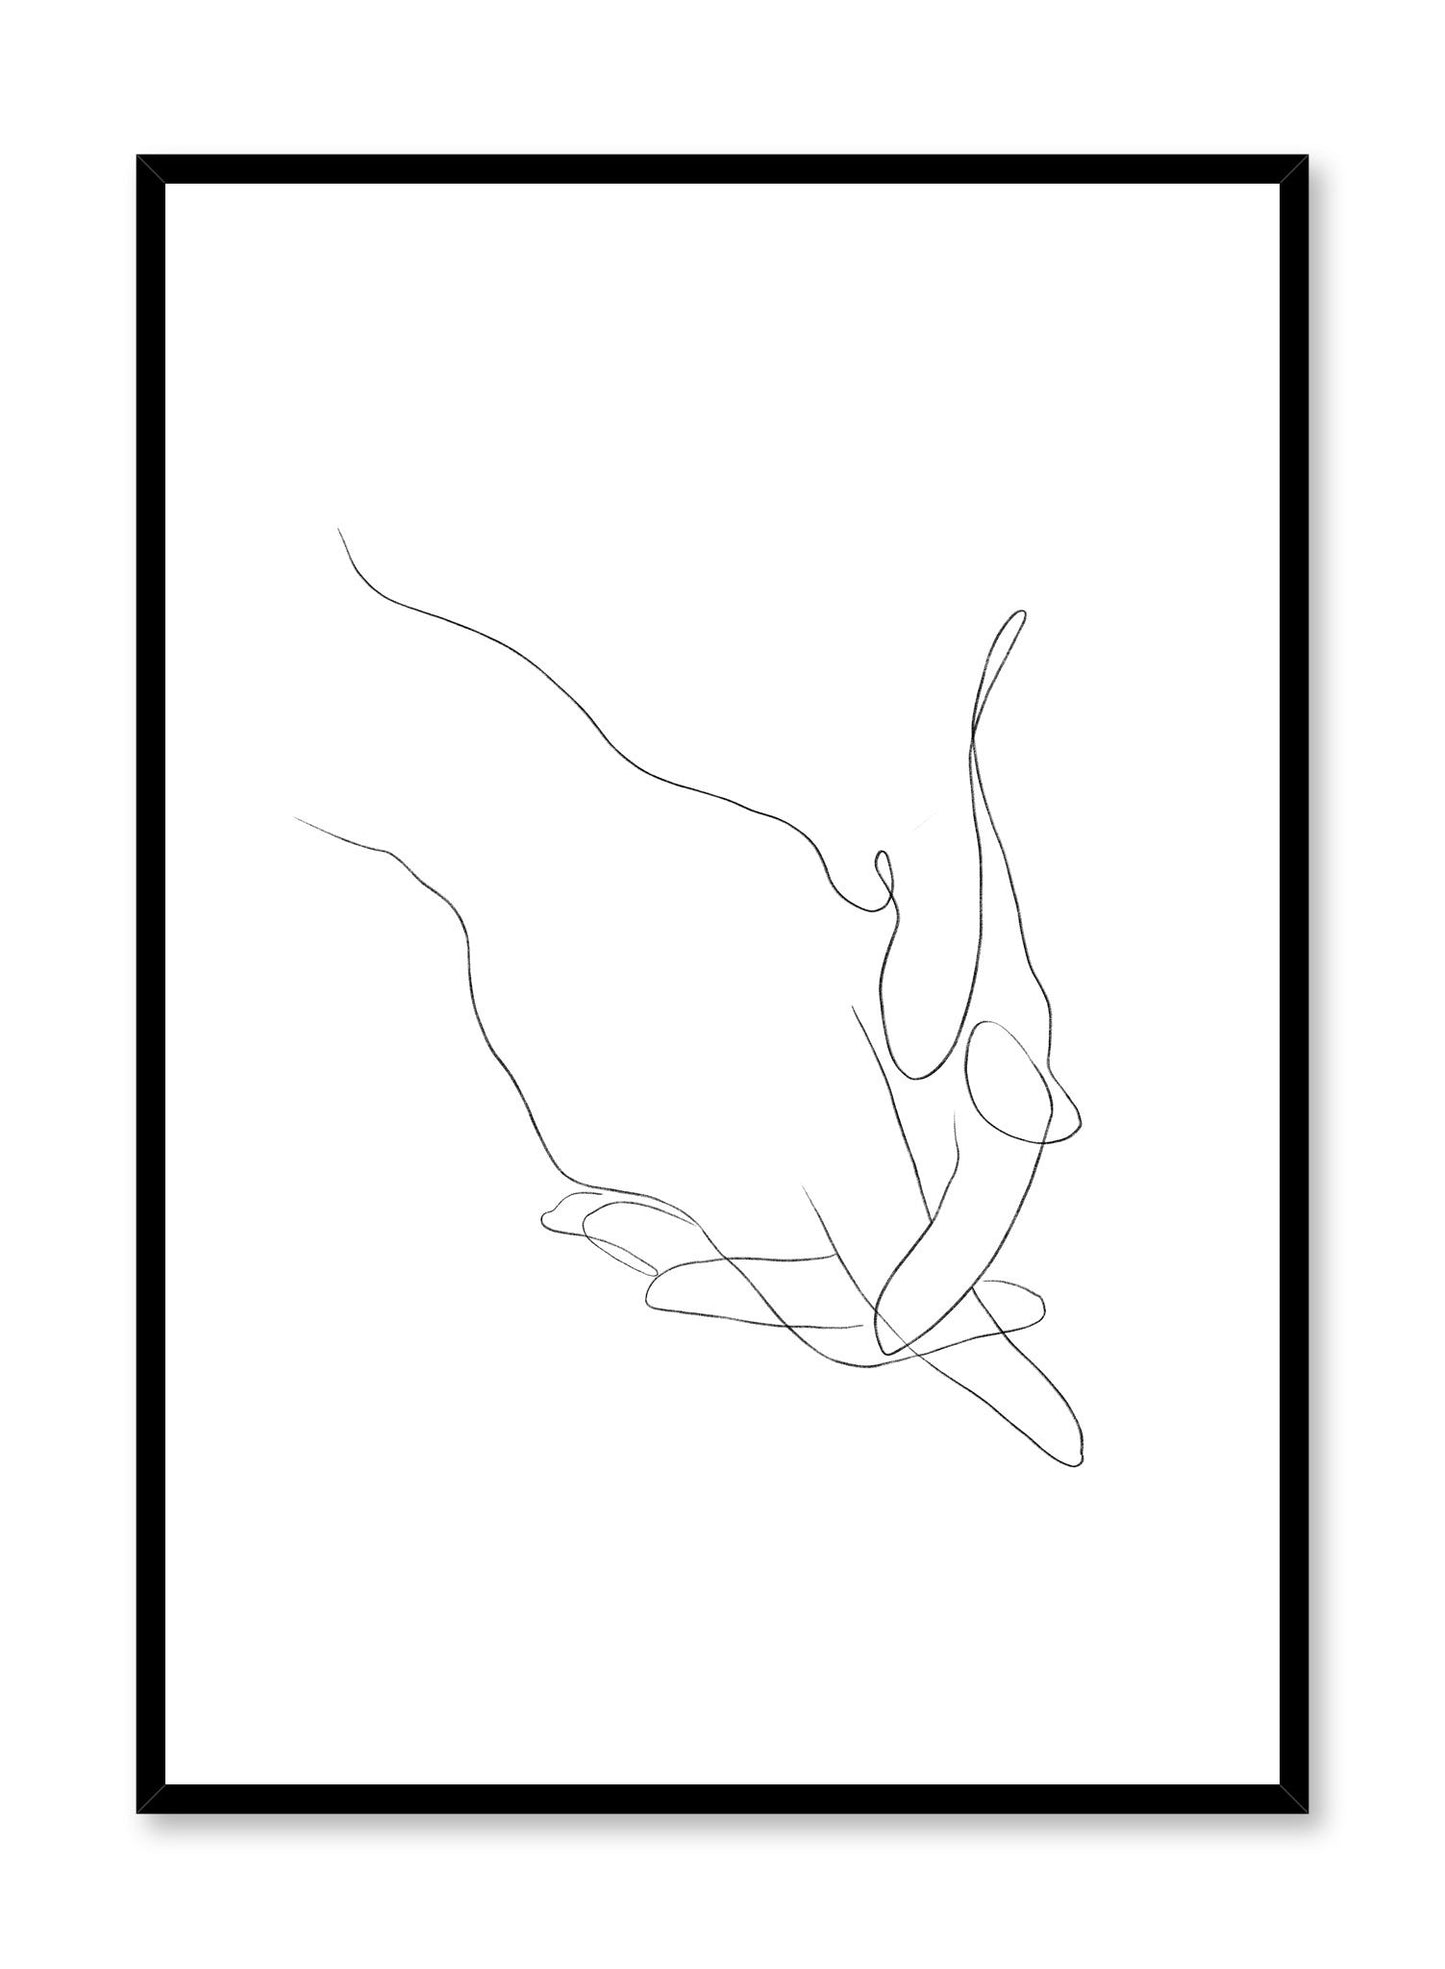 Modern minimalist poster by Opposite Wall with abstract illustration of holding hands line art